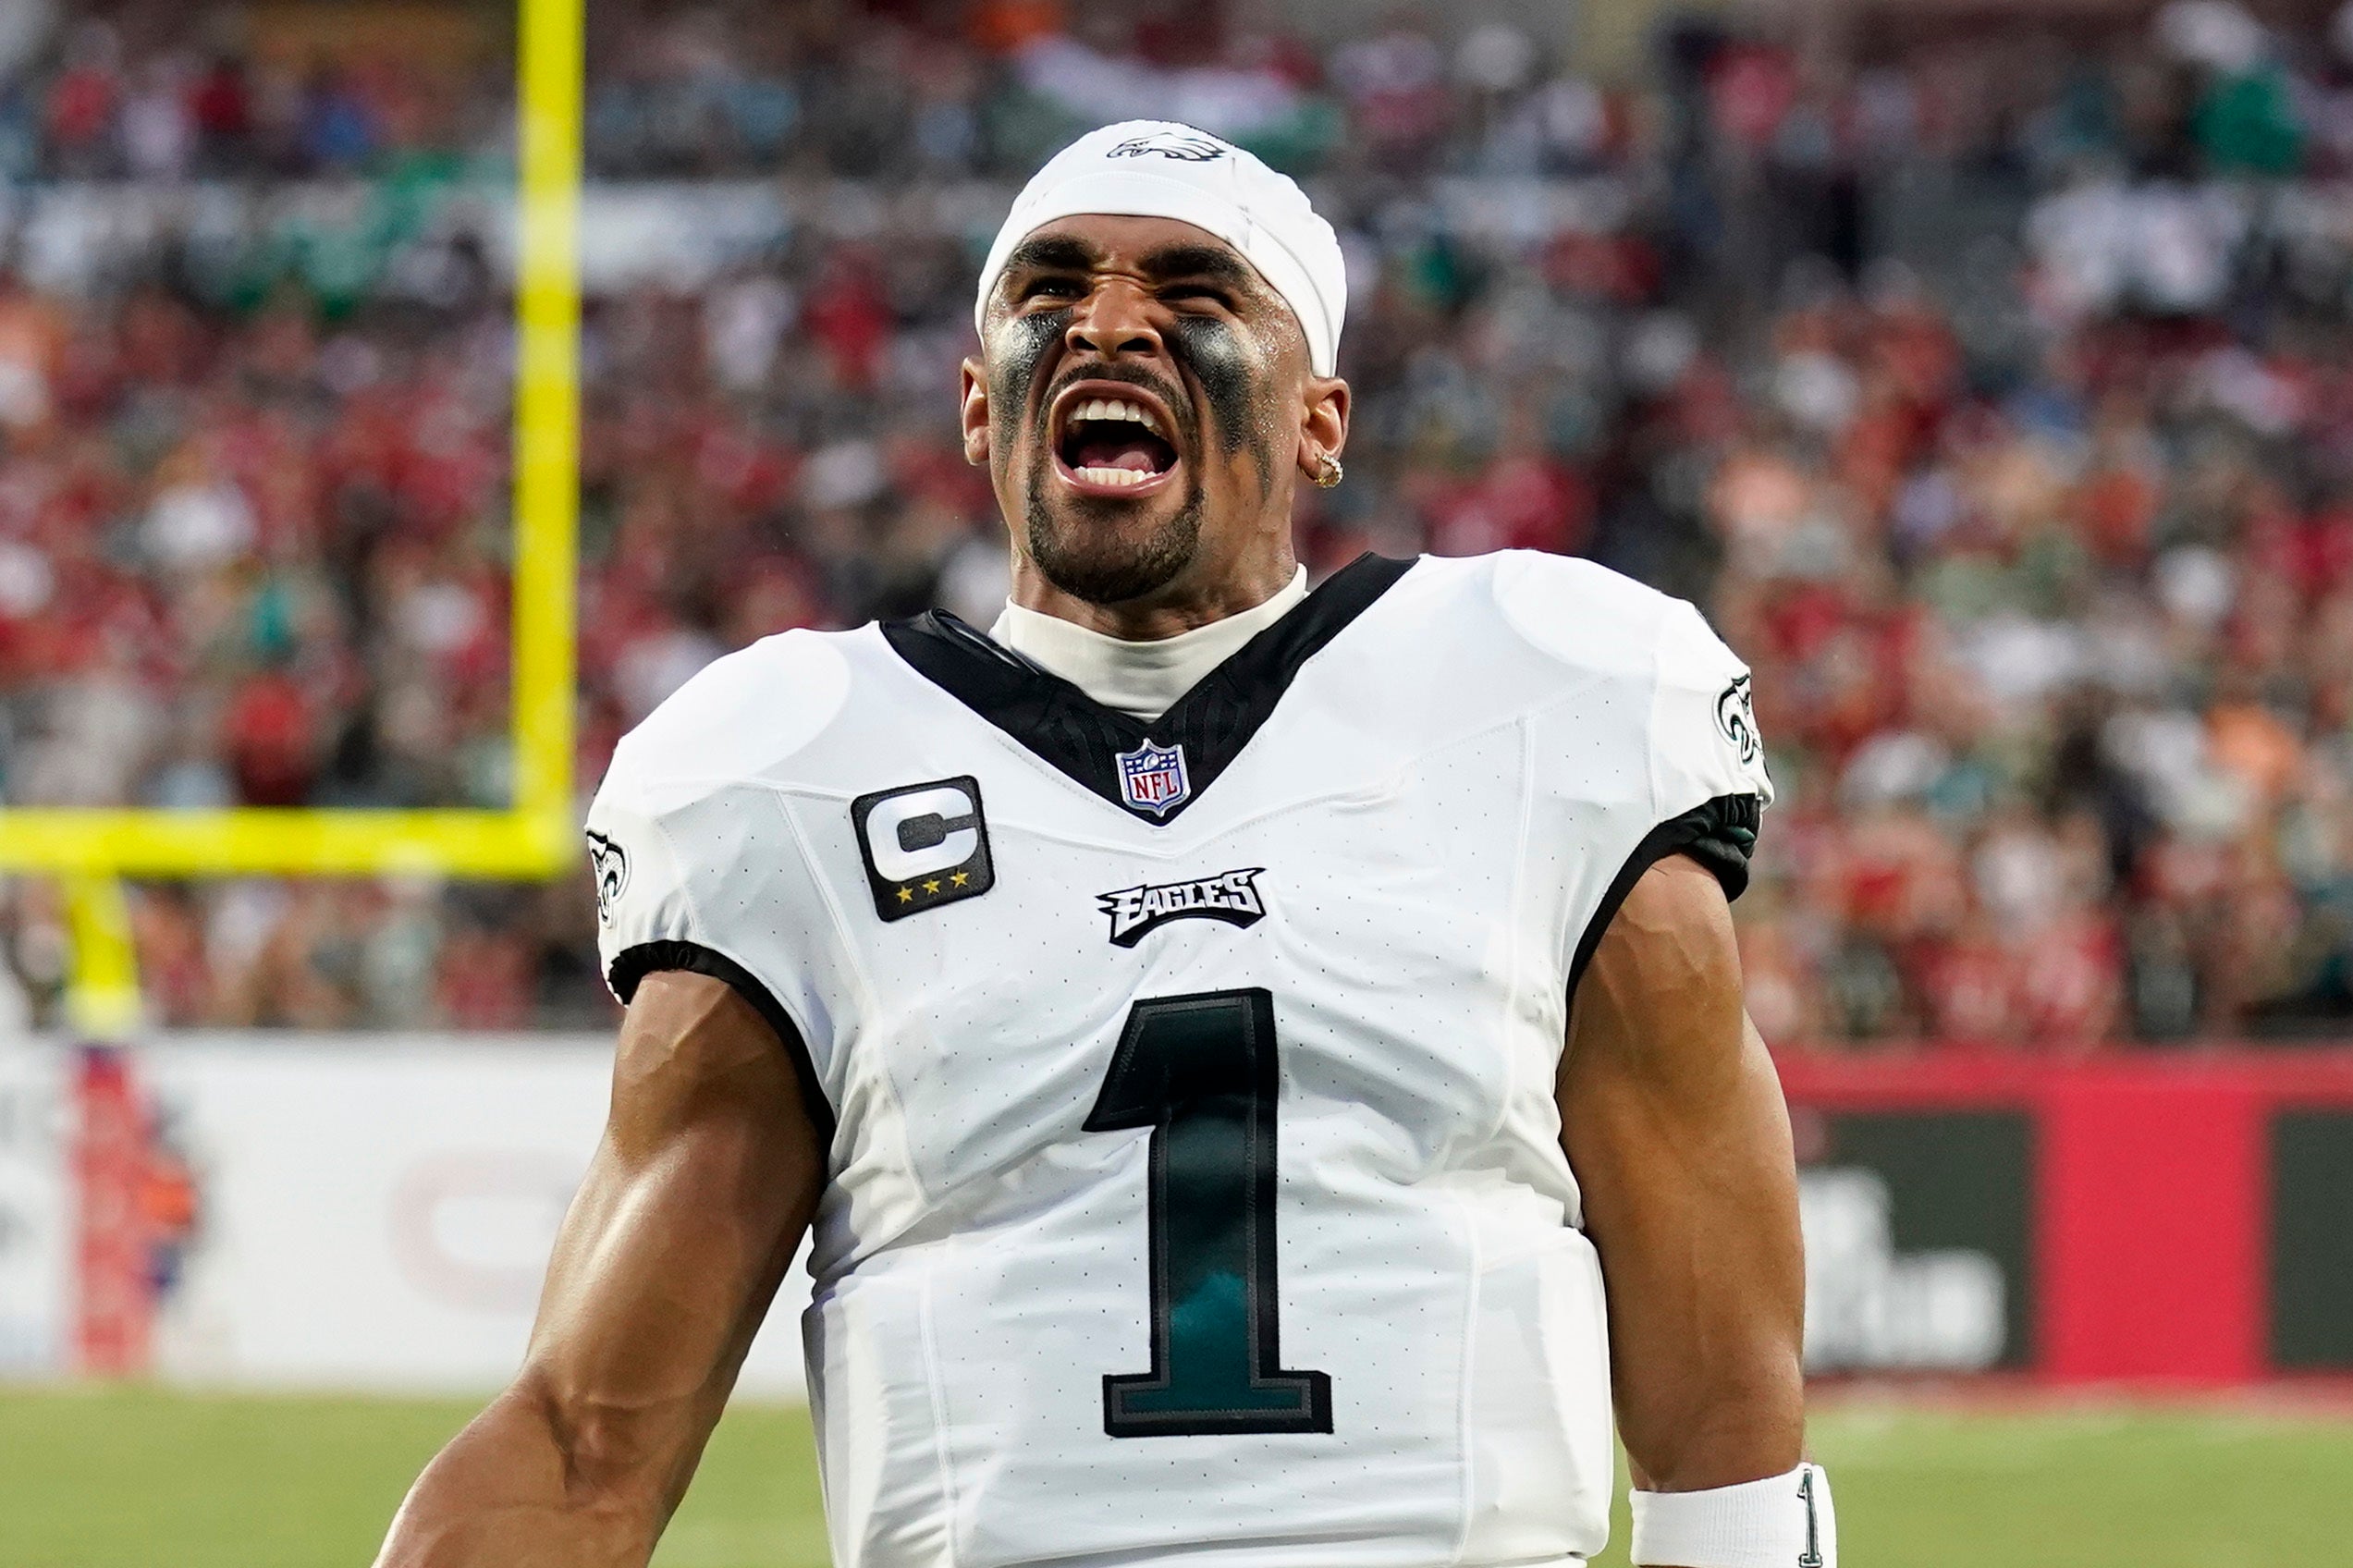 Jalen Hurts throws for TD, runs for another as Eagles thump Buccaneers  25-11 to remain unbeaten - WHYY